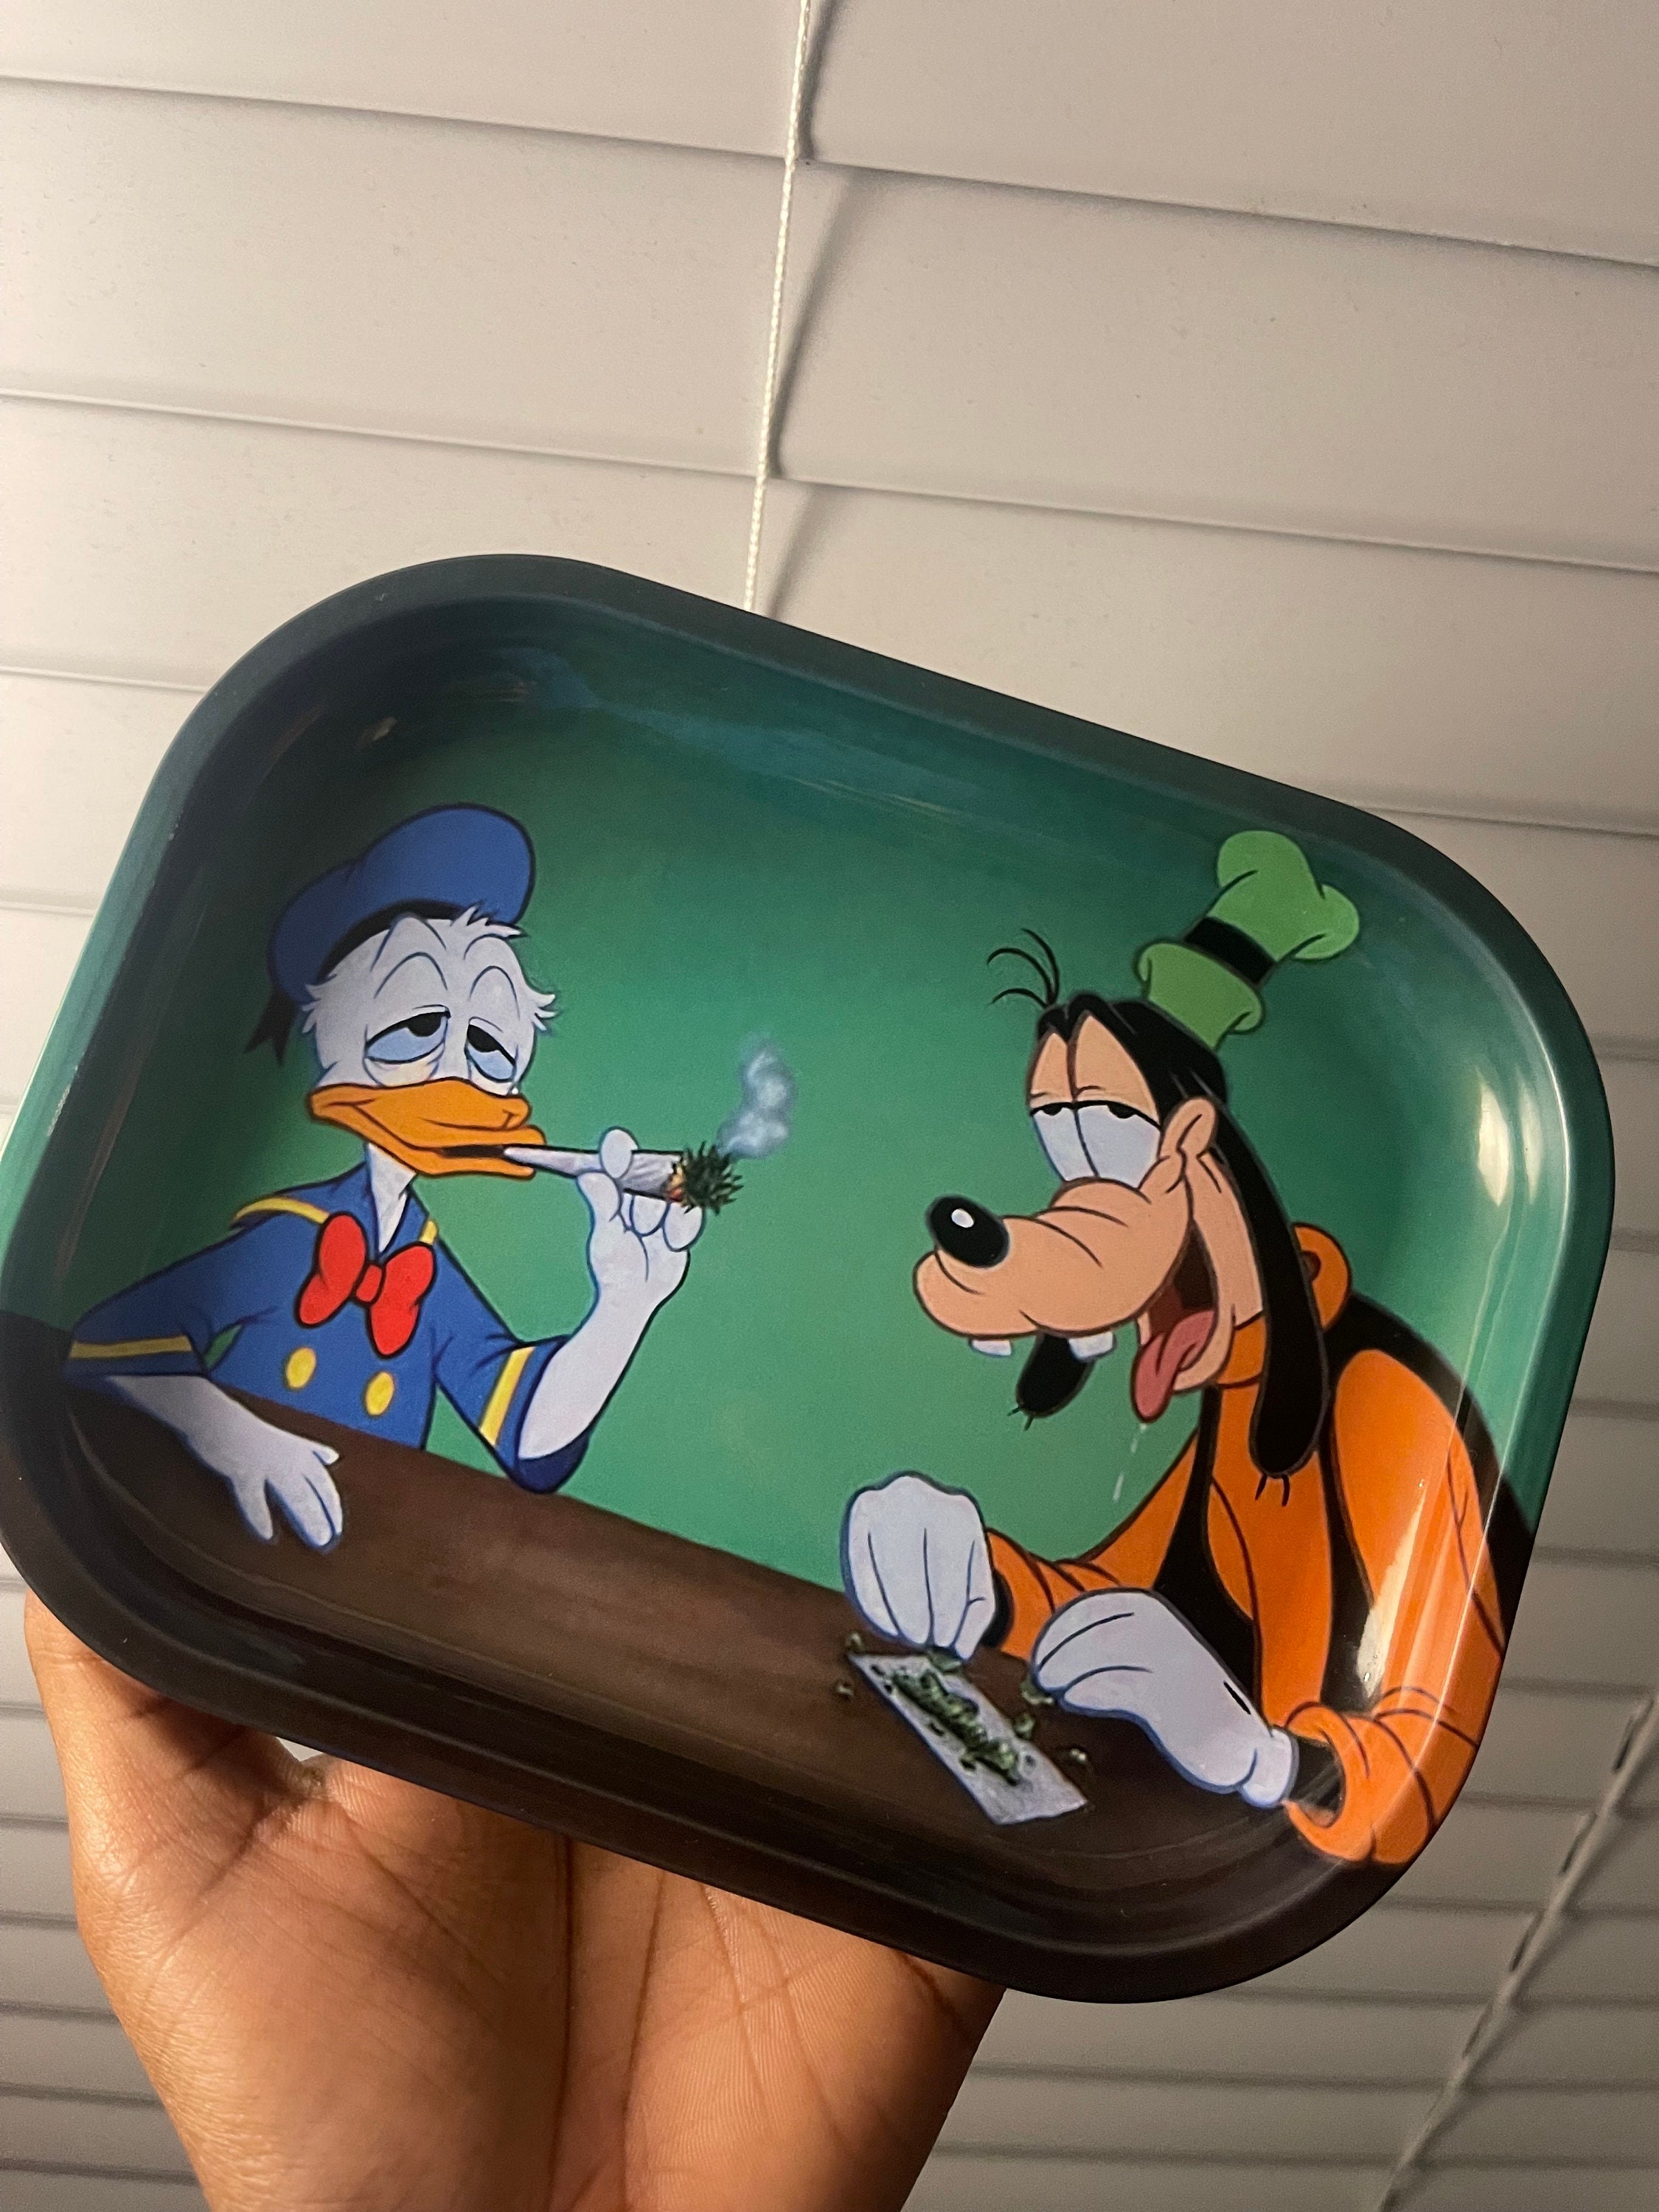 Rick and Morty Metal Rolling Trays - Medium (10.5 in x 6.25 in x 1 in)